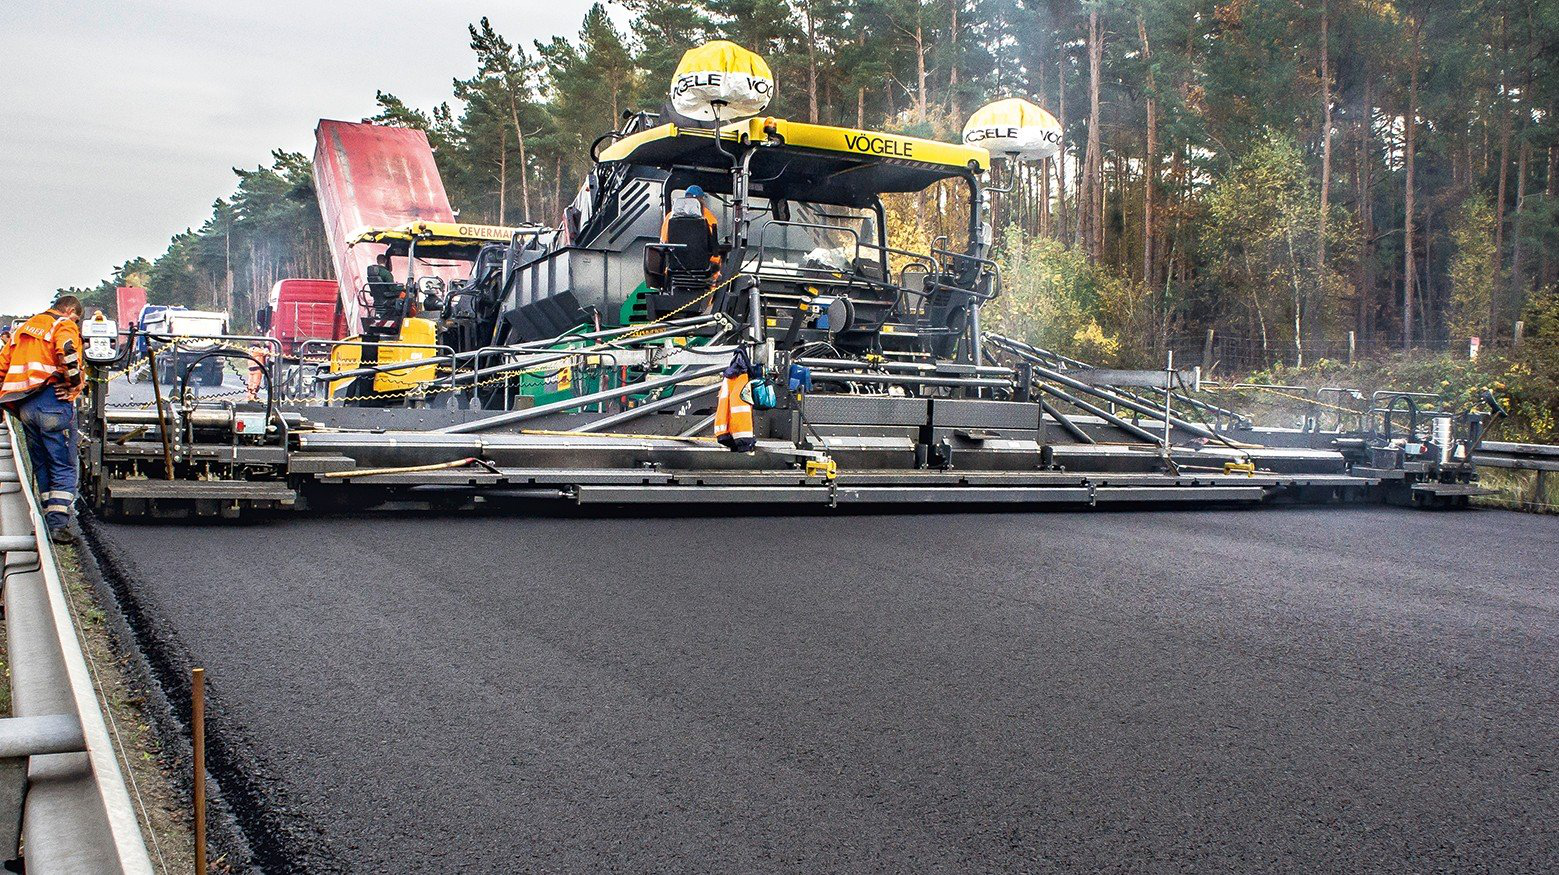 World's largest paver pours widest uninterrupted layer of pavement ever |  Equipment World